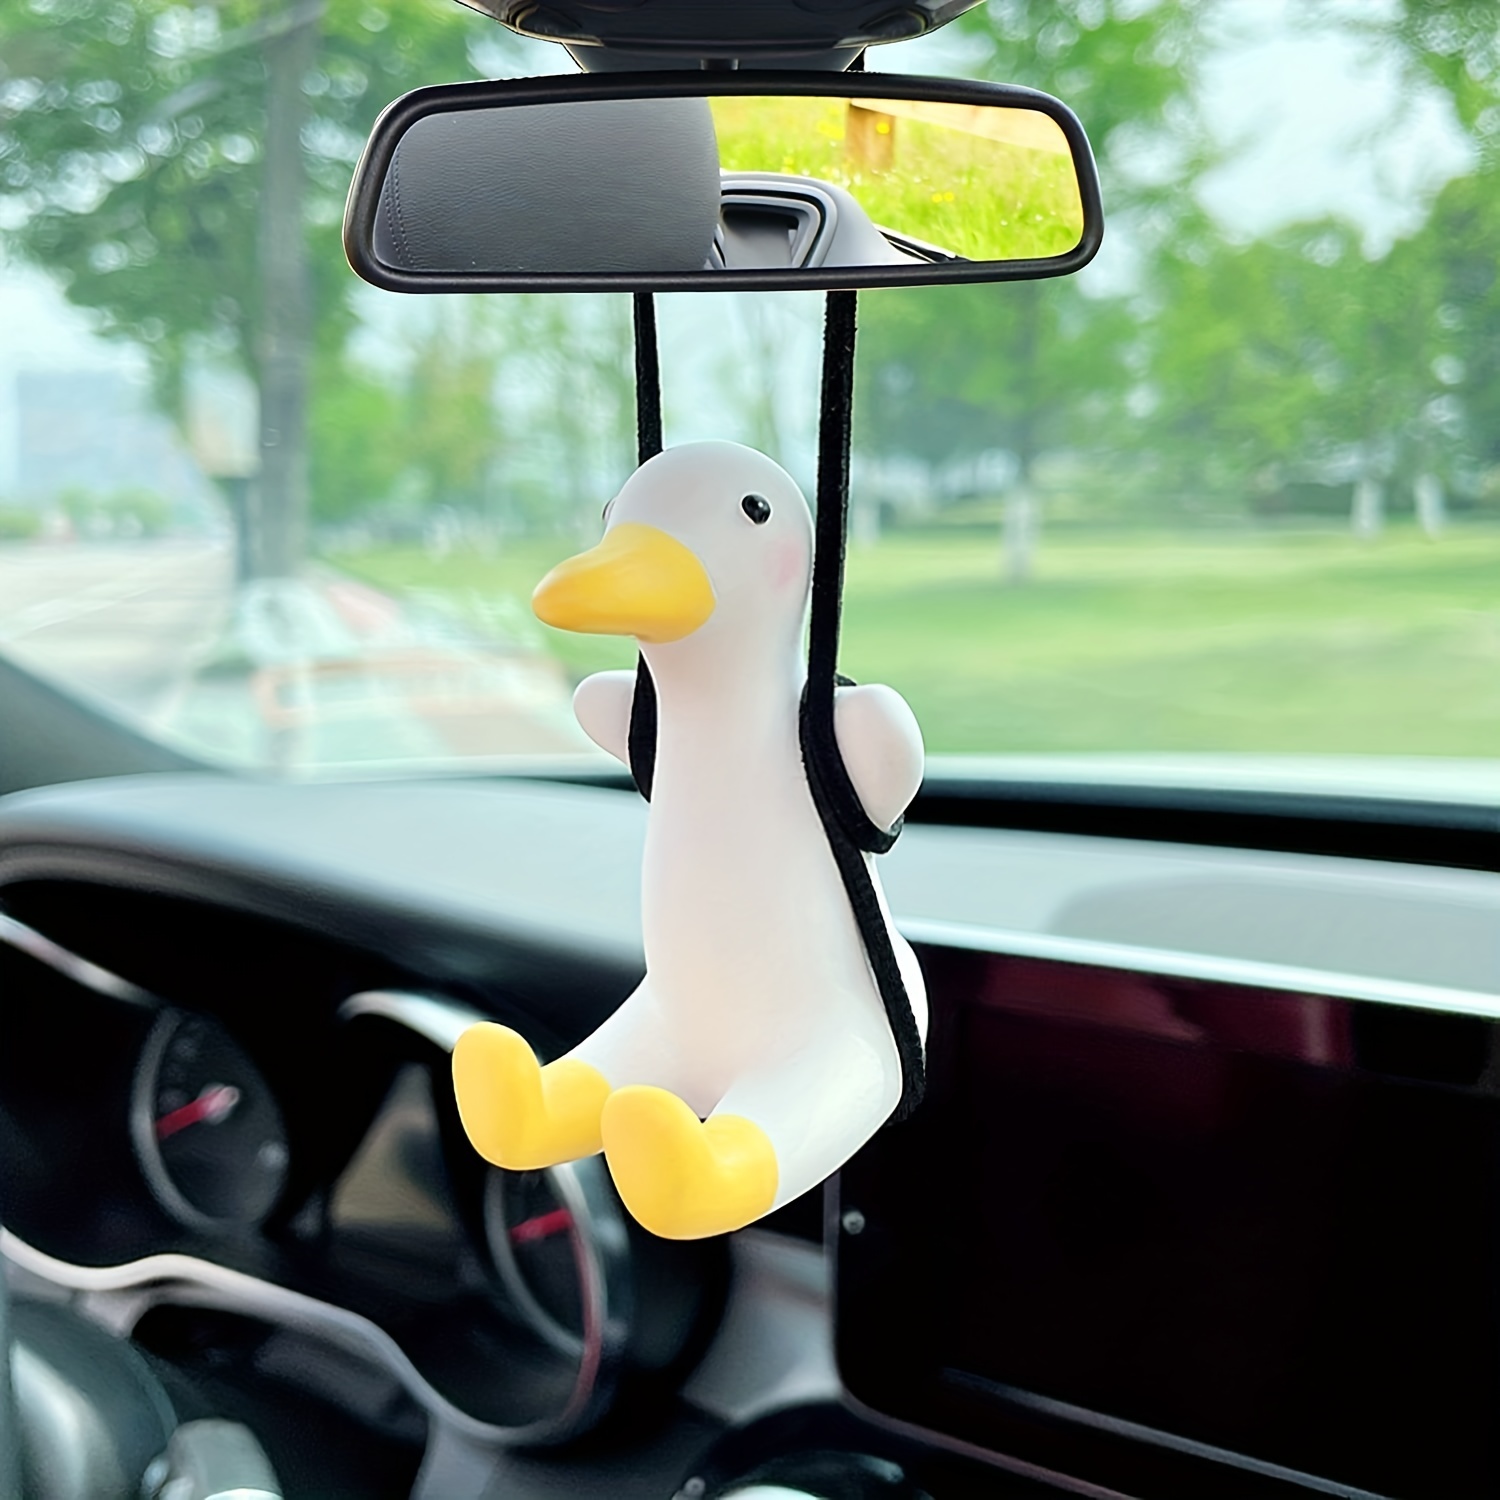 Super Cute Swing Duck Car Pendant Swing Duck Car Hanging Ornament Rearview  Mirror Interior Decoration Accessories, Don't Miss Great Deals